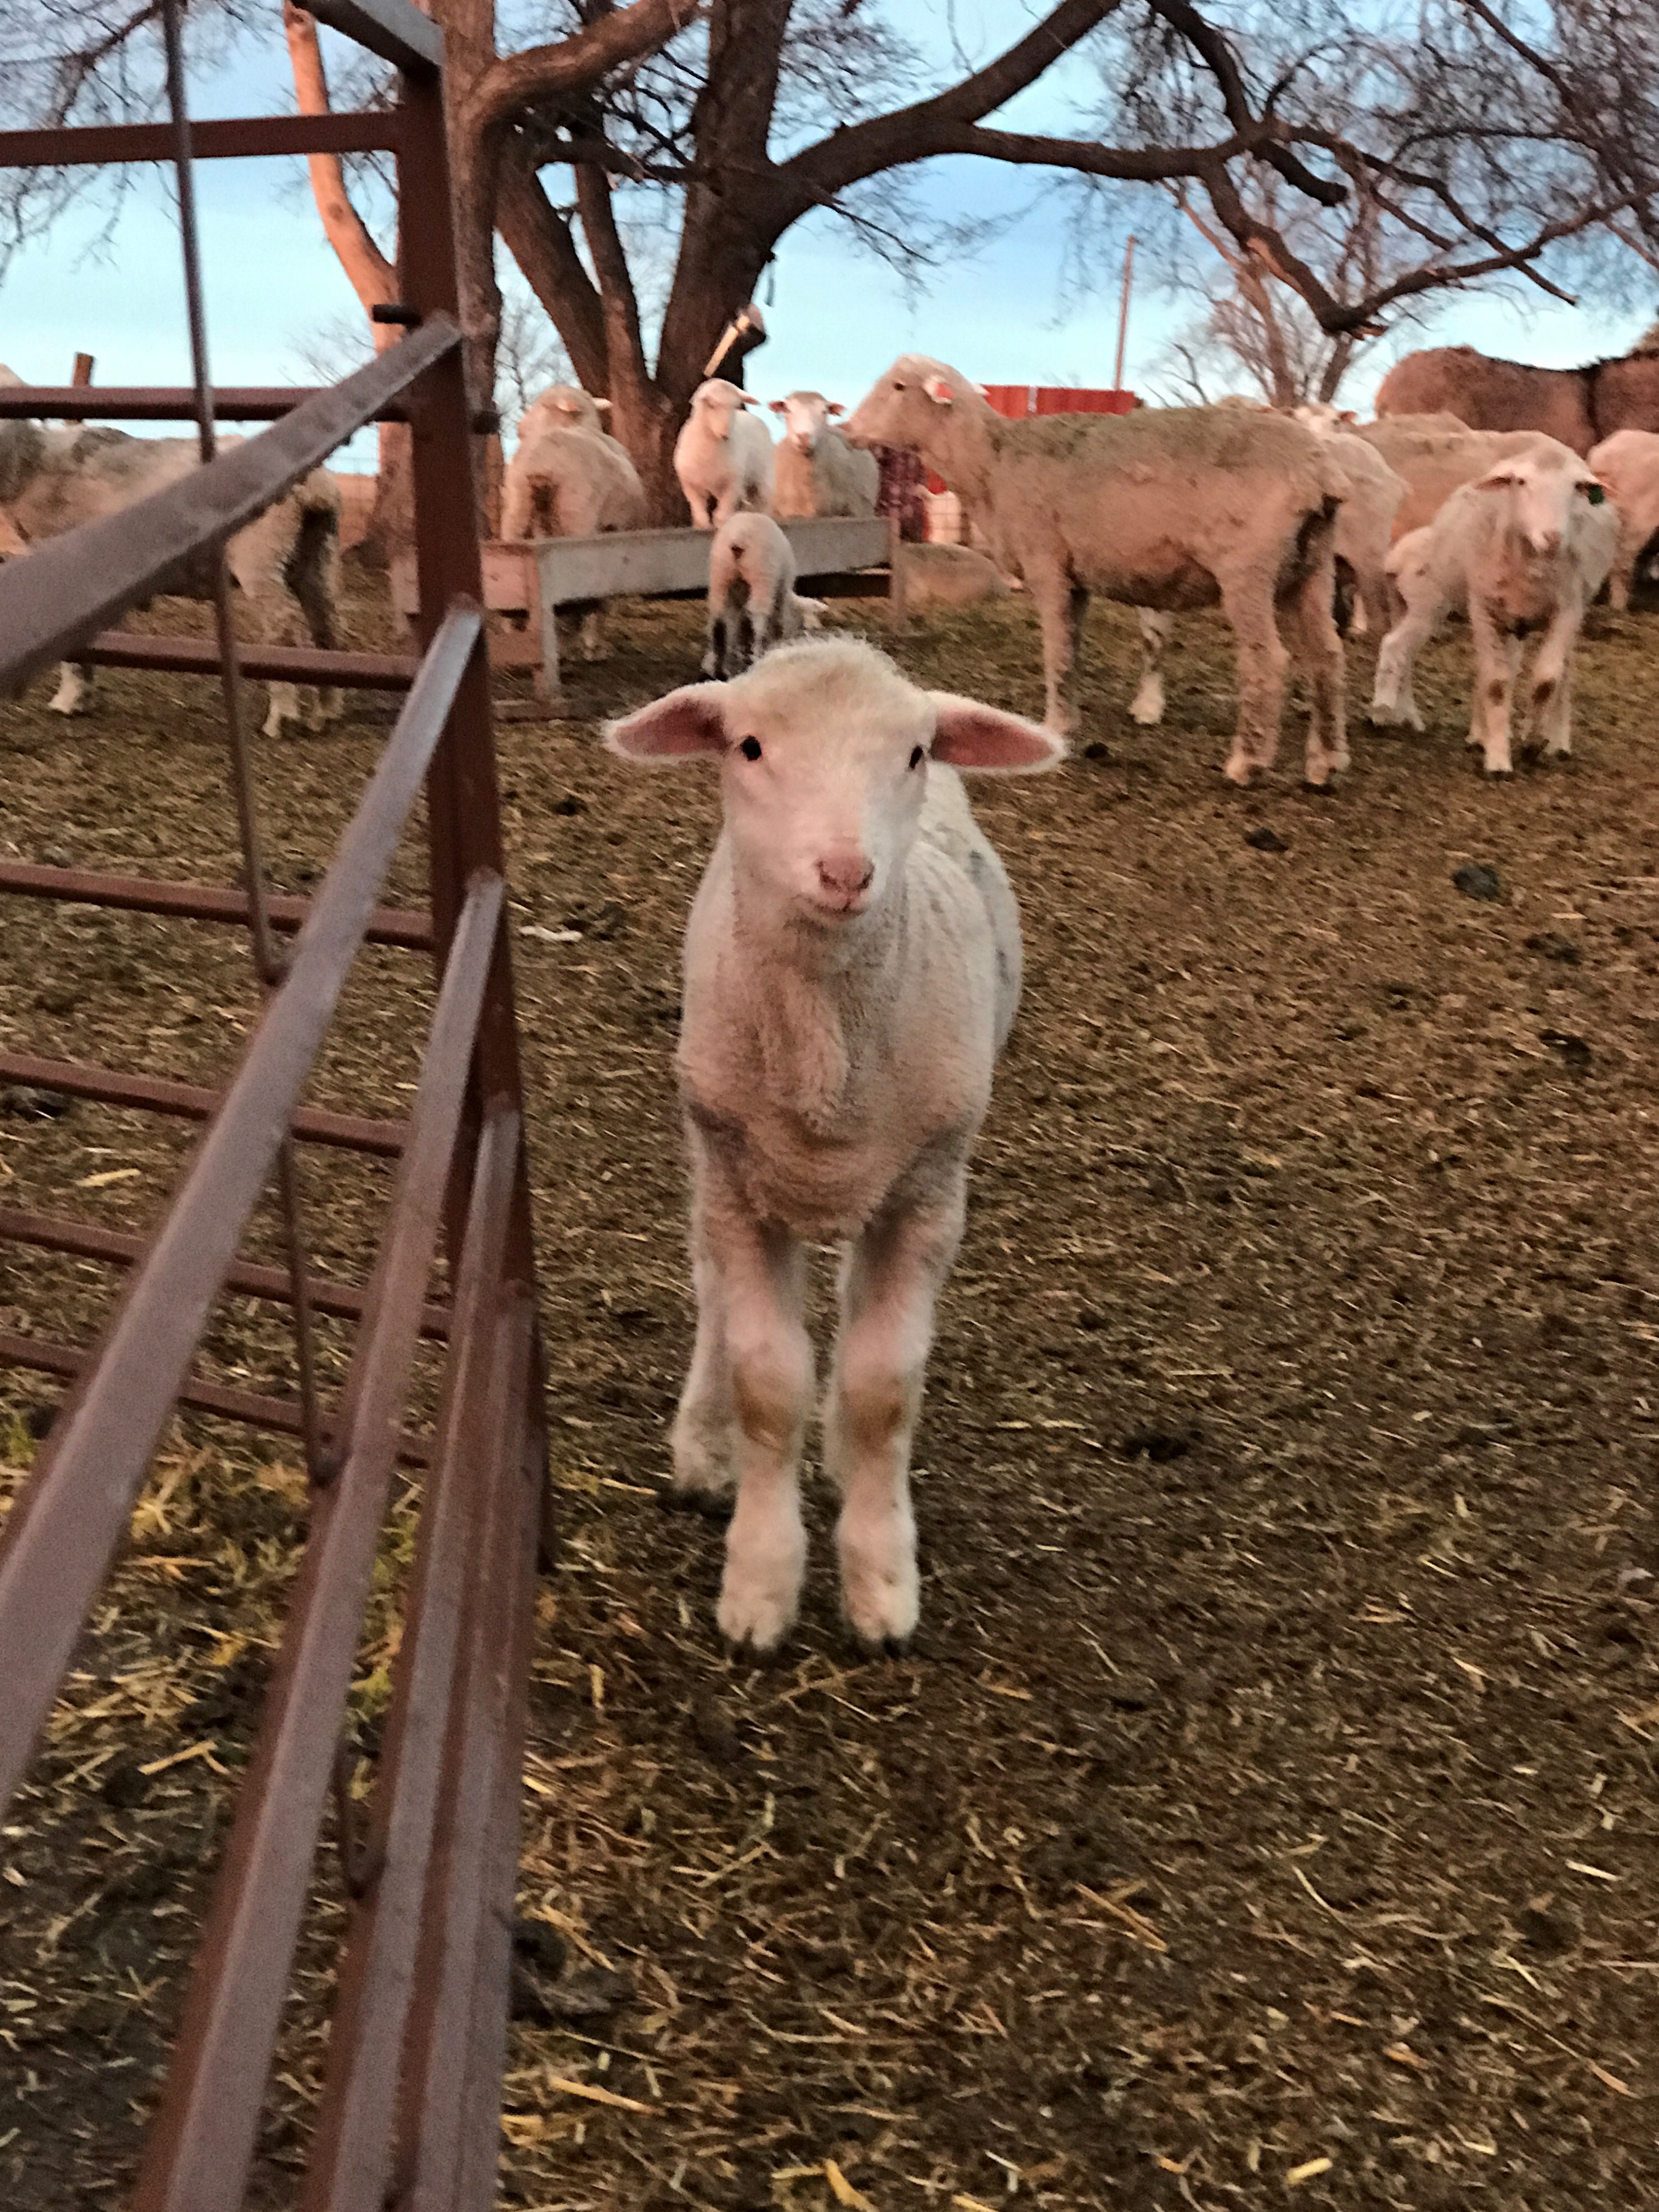 Producers need to evaluate their resources, time and risk aversion to determine if their 2020 lamb crop should stay or be sold. (NDSU photo)